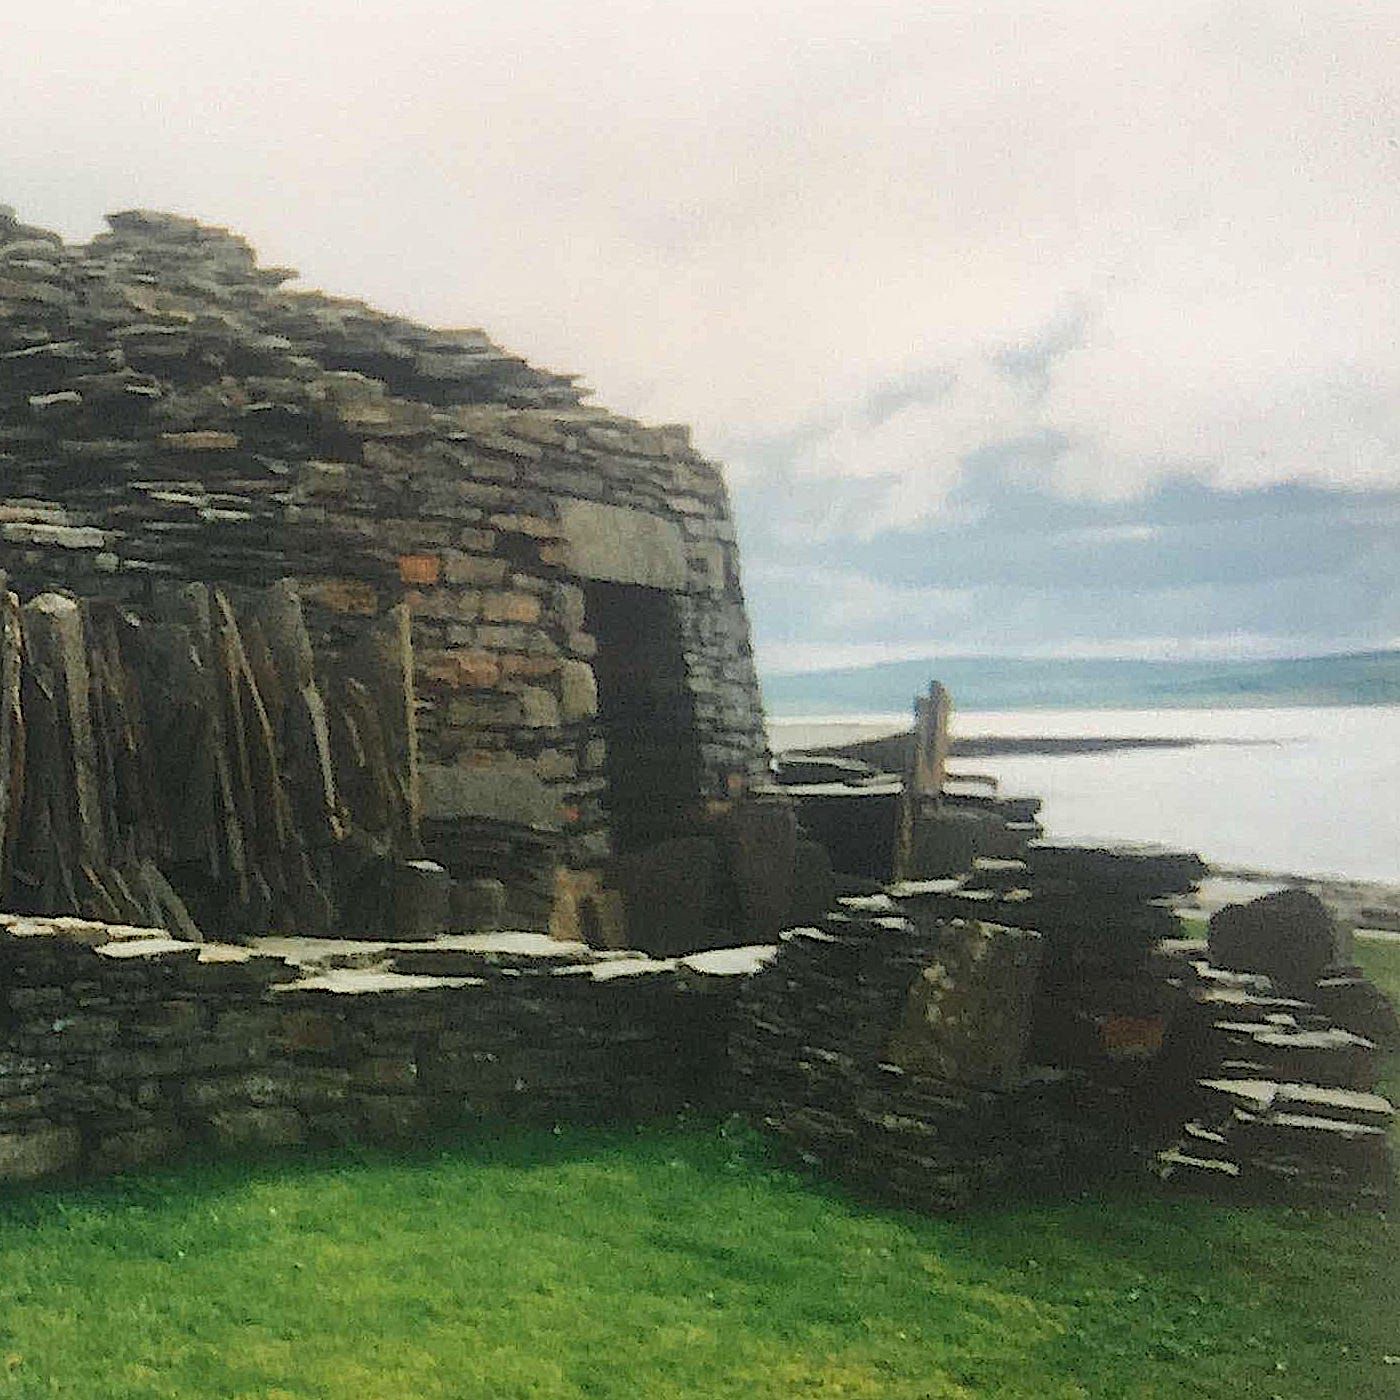 Neolithic Broch of Gurness in Orkney.